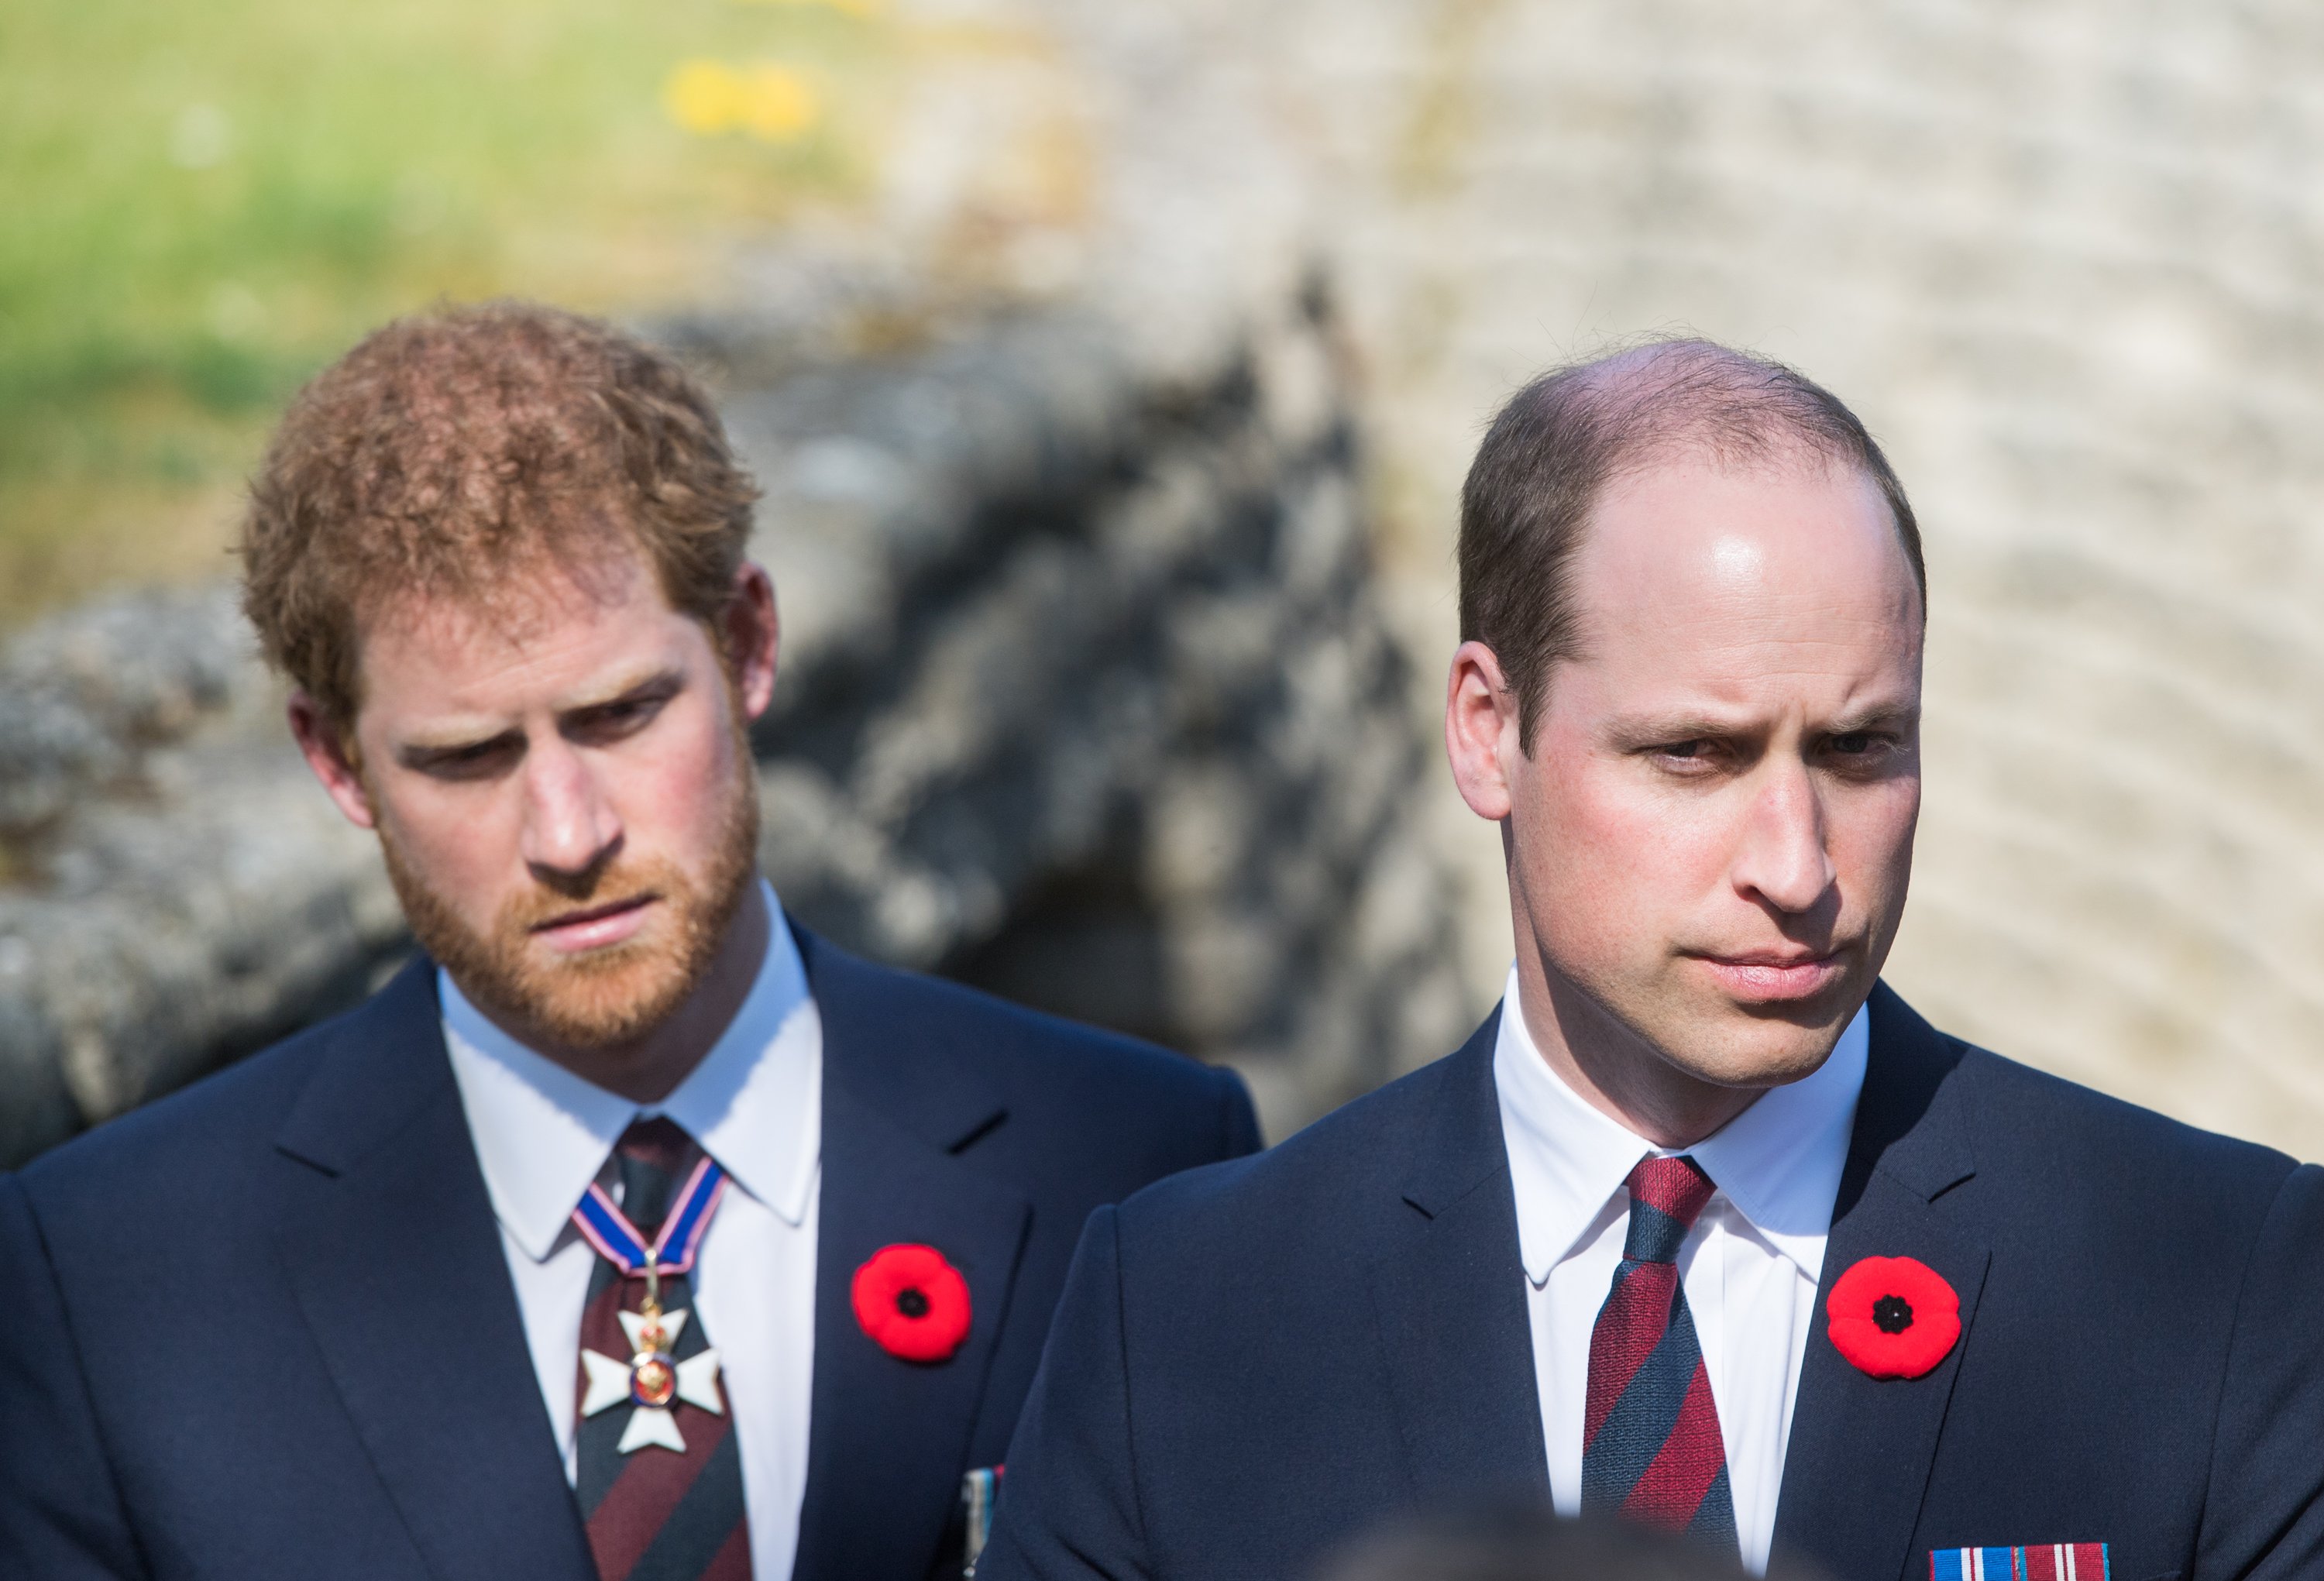 Prince William and Prince Harry together at commemorations for the 100th anniversary of the battle of Vimy Ridge